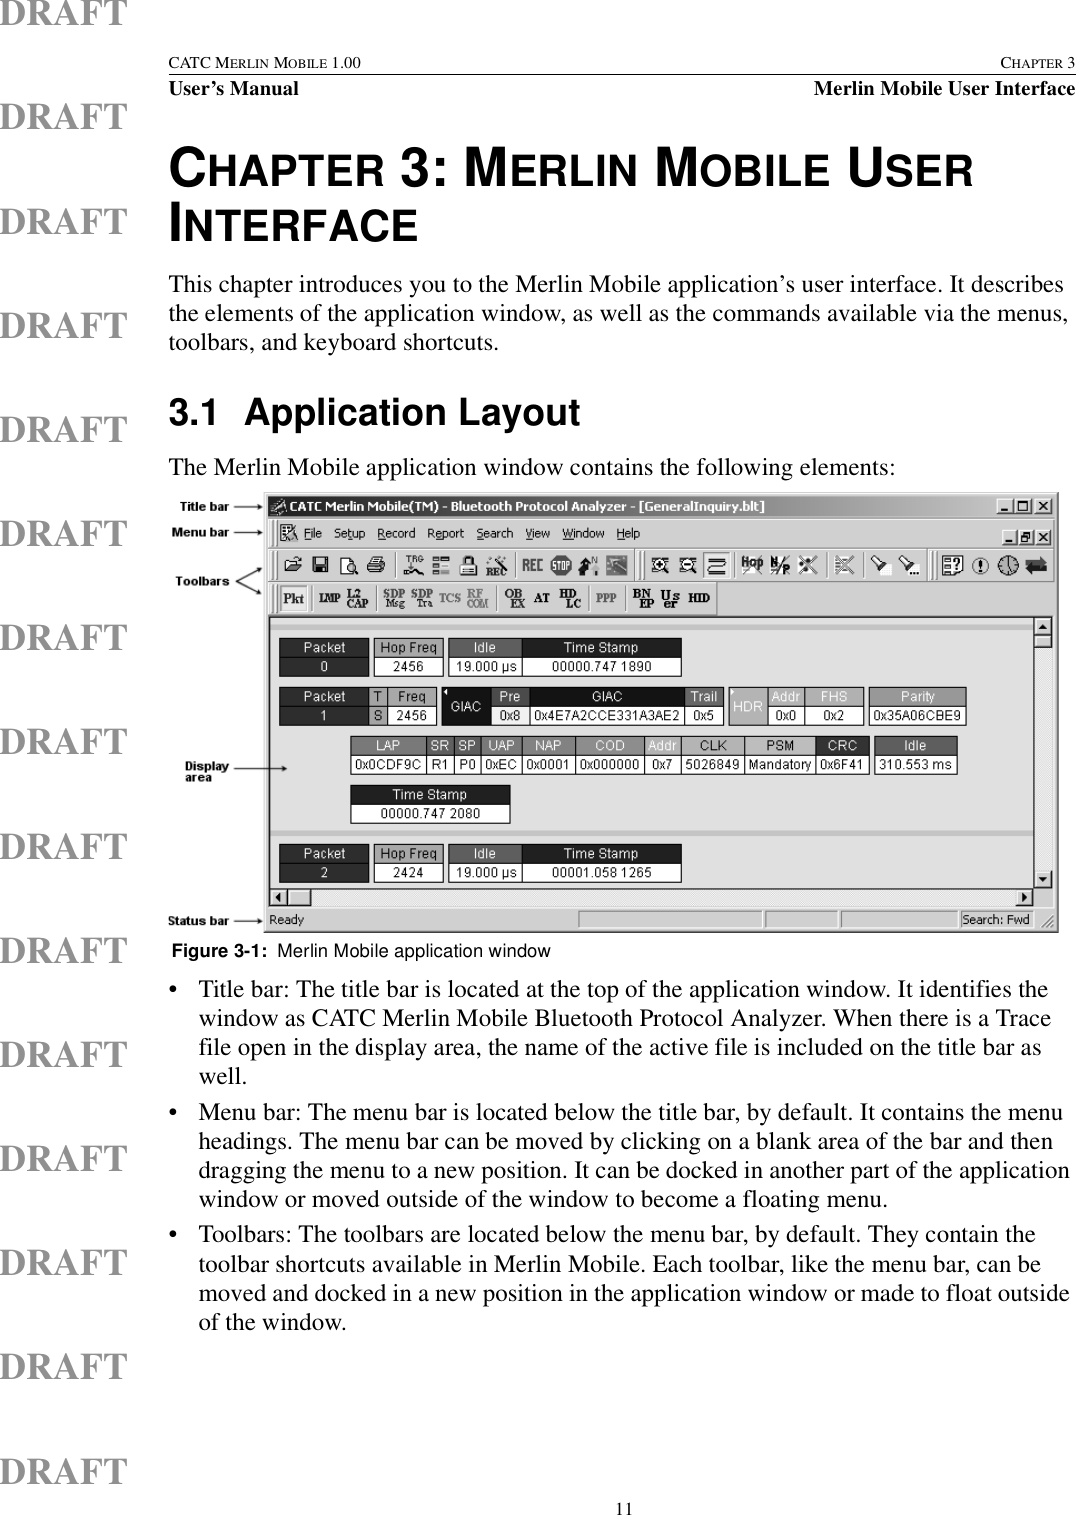  11CATC MERLIN MOBILE 1.00 CHAPTER 3User’s Manual Merlin Mobile User InterfaceDRAFTDRAFTDRAFTDRAFTDRAFTDRAFTDRAFTDRAFTDRAFTDRAFTDRAFTDRAFTDRAFTDRAFTDRAFTCHAPTER 3: MERLIN MOBILE USER INTERFACEThis chapter introduces you to the Merlin Mobile application’s user interface. It describes the elements of the application window, as well as the commands available via the menus, toolbars, and keyboard shortcuts.3.1 Application LayoutThe Merlin Mobile application window contains the following elements:• Title bar: The title bar is located at the top of the application window. It identifies the window as CATC Merlin Mobile Bluetooth Protocol Analyzer. When there is a Trace file open in the display area, the name of the active file is included on the title bar as well.• Menu bar: The menu bar is located below the title bar, by default. It contains the menu headings. The menu bar can be moved by clicking on a blank area of the bar and then dragging the menu to a new position. It can be docked in another part of the application window or moved outside of the window to become a floating menu.• Toolbars: The toolbars are located below the menu bar, by default. They contain the toolbar shortcuts available in Merlin Mobile. Each toolbar, like the menu bar, can be moved and docked in a new position in the application window or made to float outside of the window.Figure 3-1:  Merlin Mobile application window